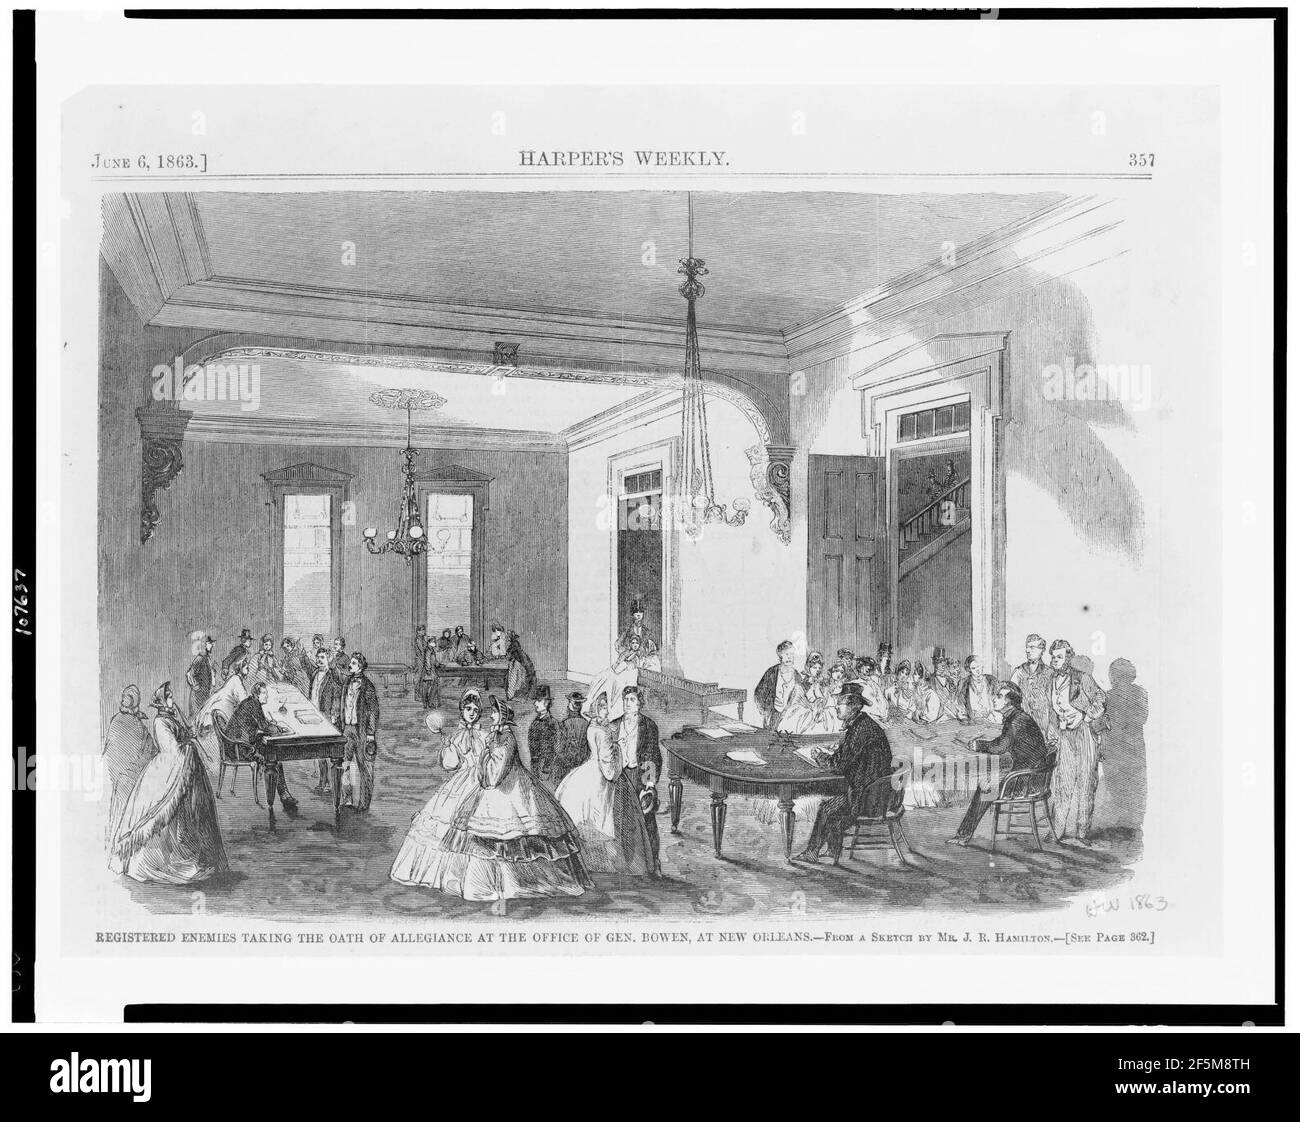 Registered enemies taking the oath of allegiance at the office of Gen. Bowen, at New Orleans - From a sketch by Mr. J.R. Hamilton. Stock Photo